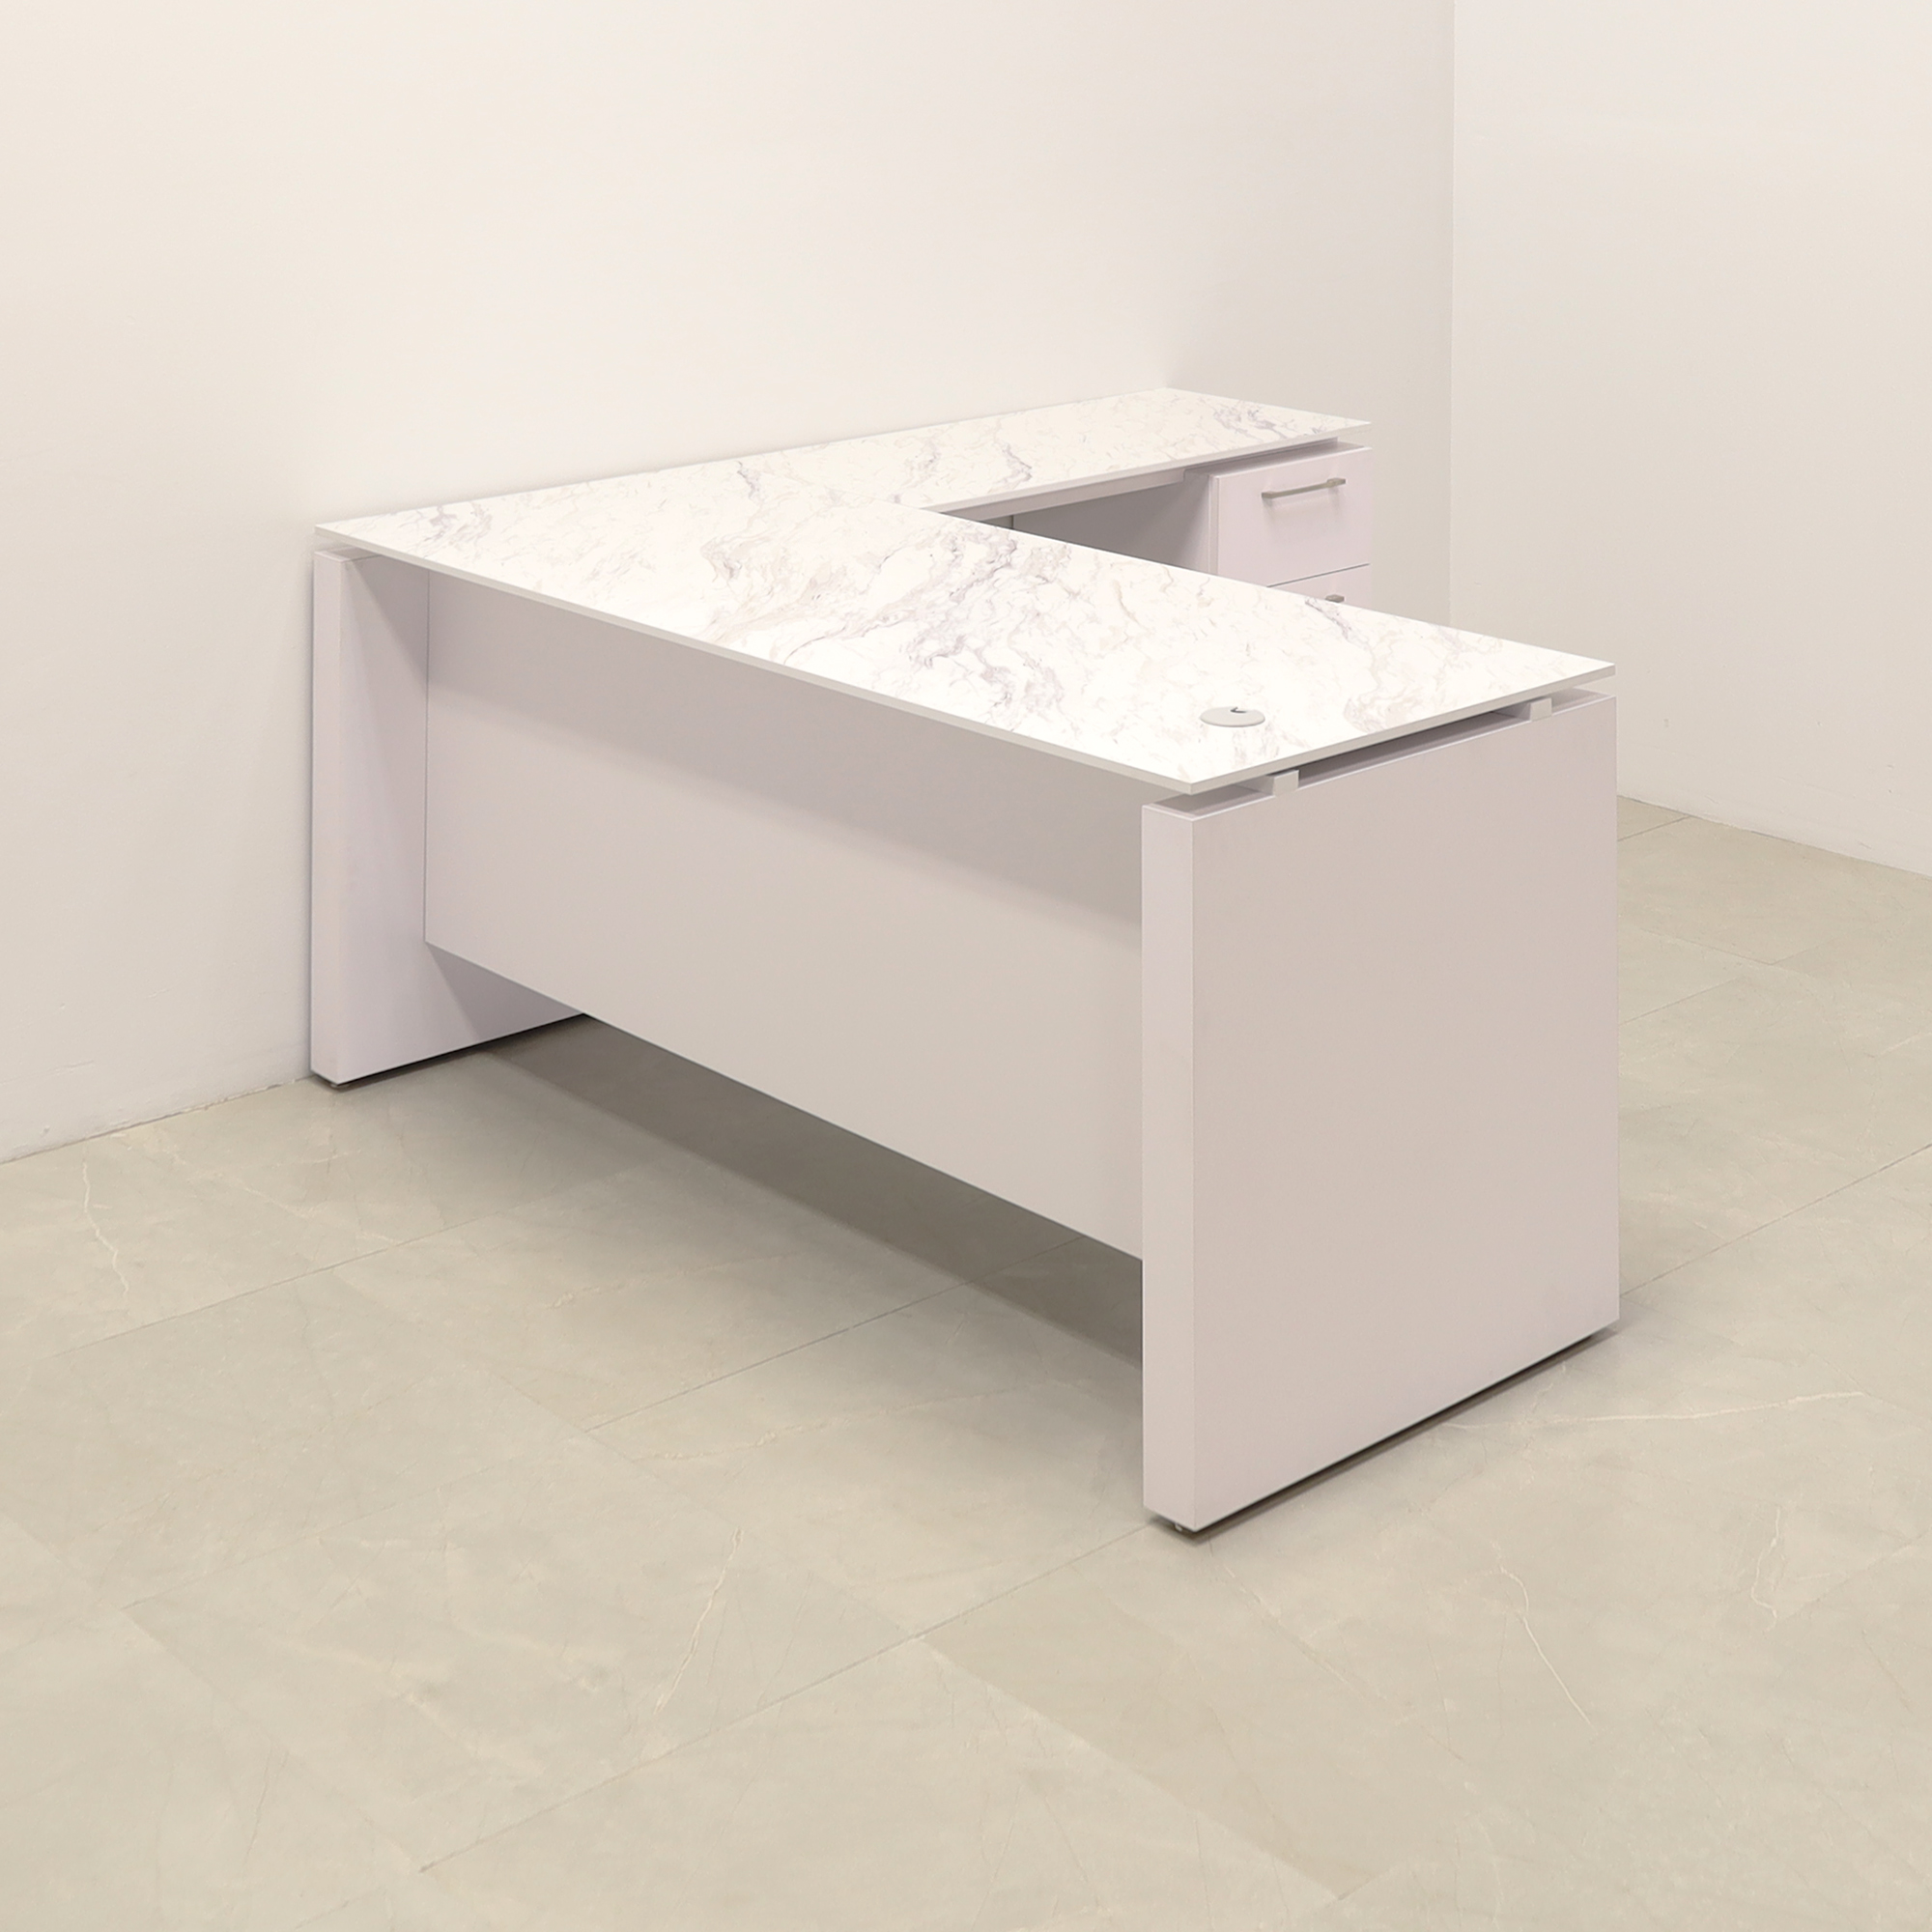 72 inches Denver L-Shape W/ Cabinet Executive Desk In Calcutta Blanc Engineered Stone Top and white matte laminate base and storage, with two pencil drawers and one file cabinet shown here.